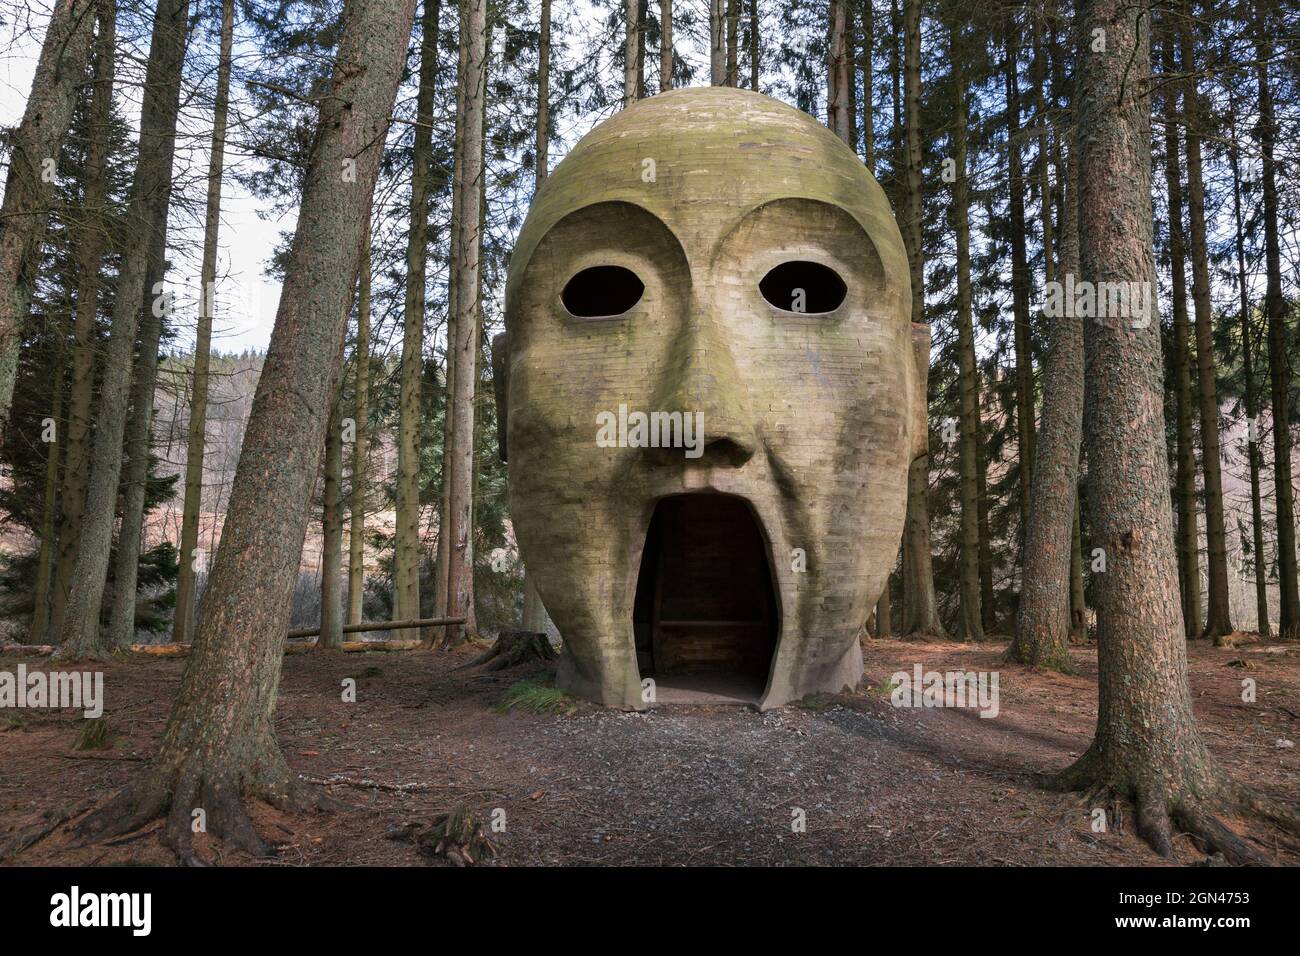 Silva capitalis, forest head sculpture, part of Kielder Water and Forest Park art trail, Northumberland, UK Stock Photo